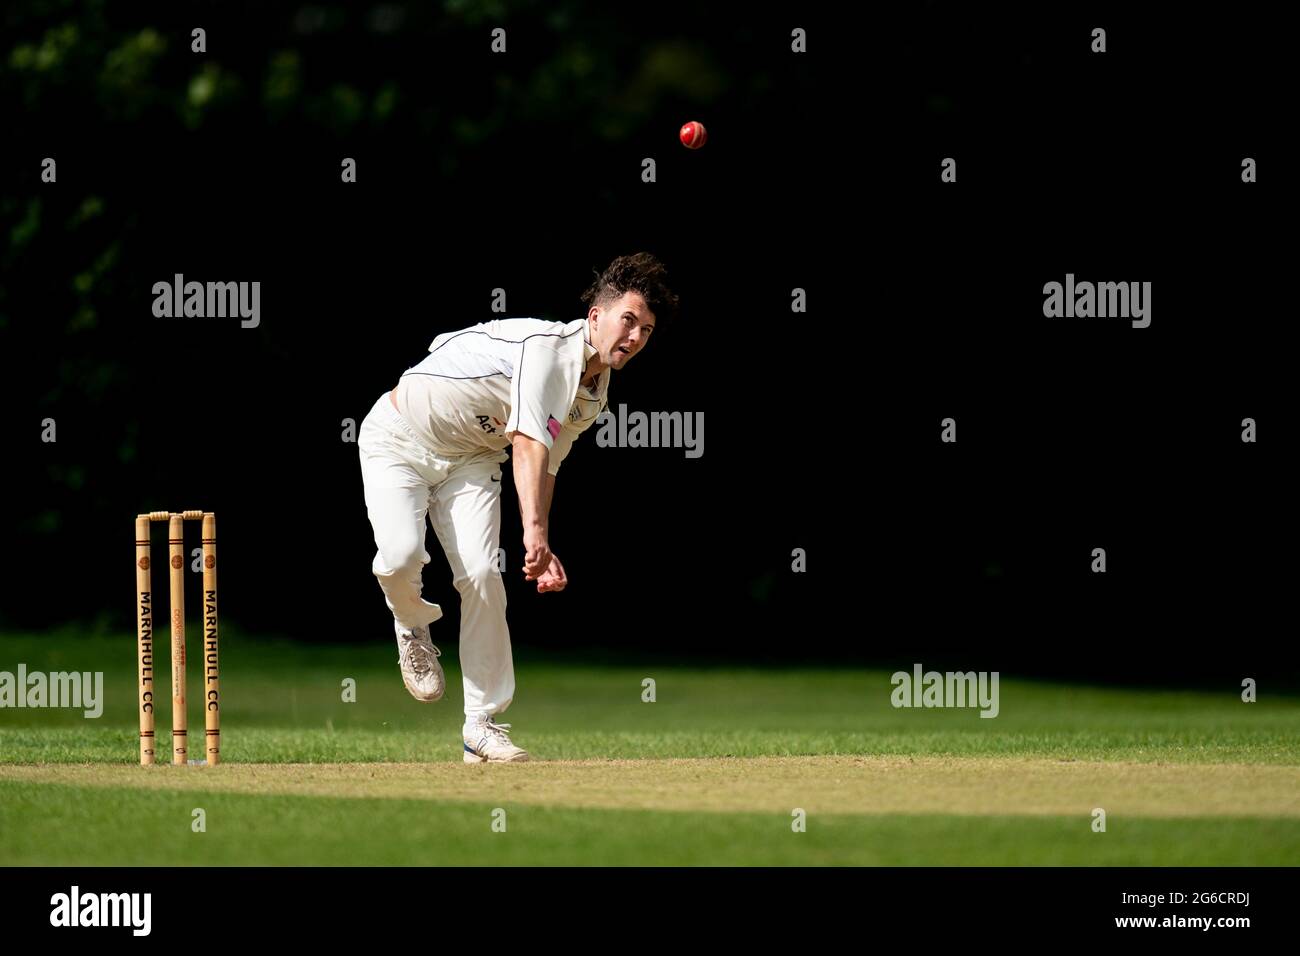 Cricket bowler in action. Stock Photo